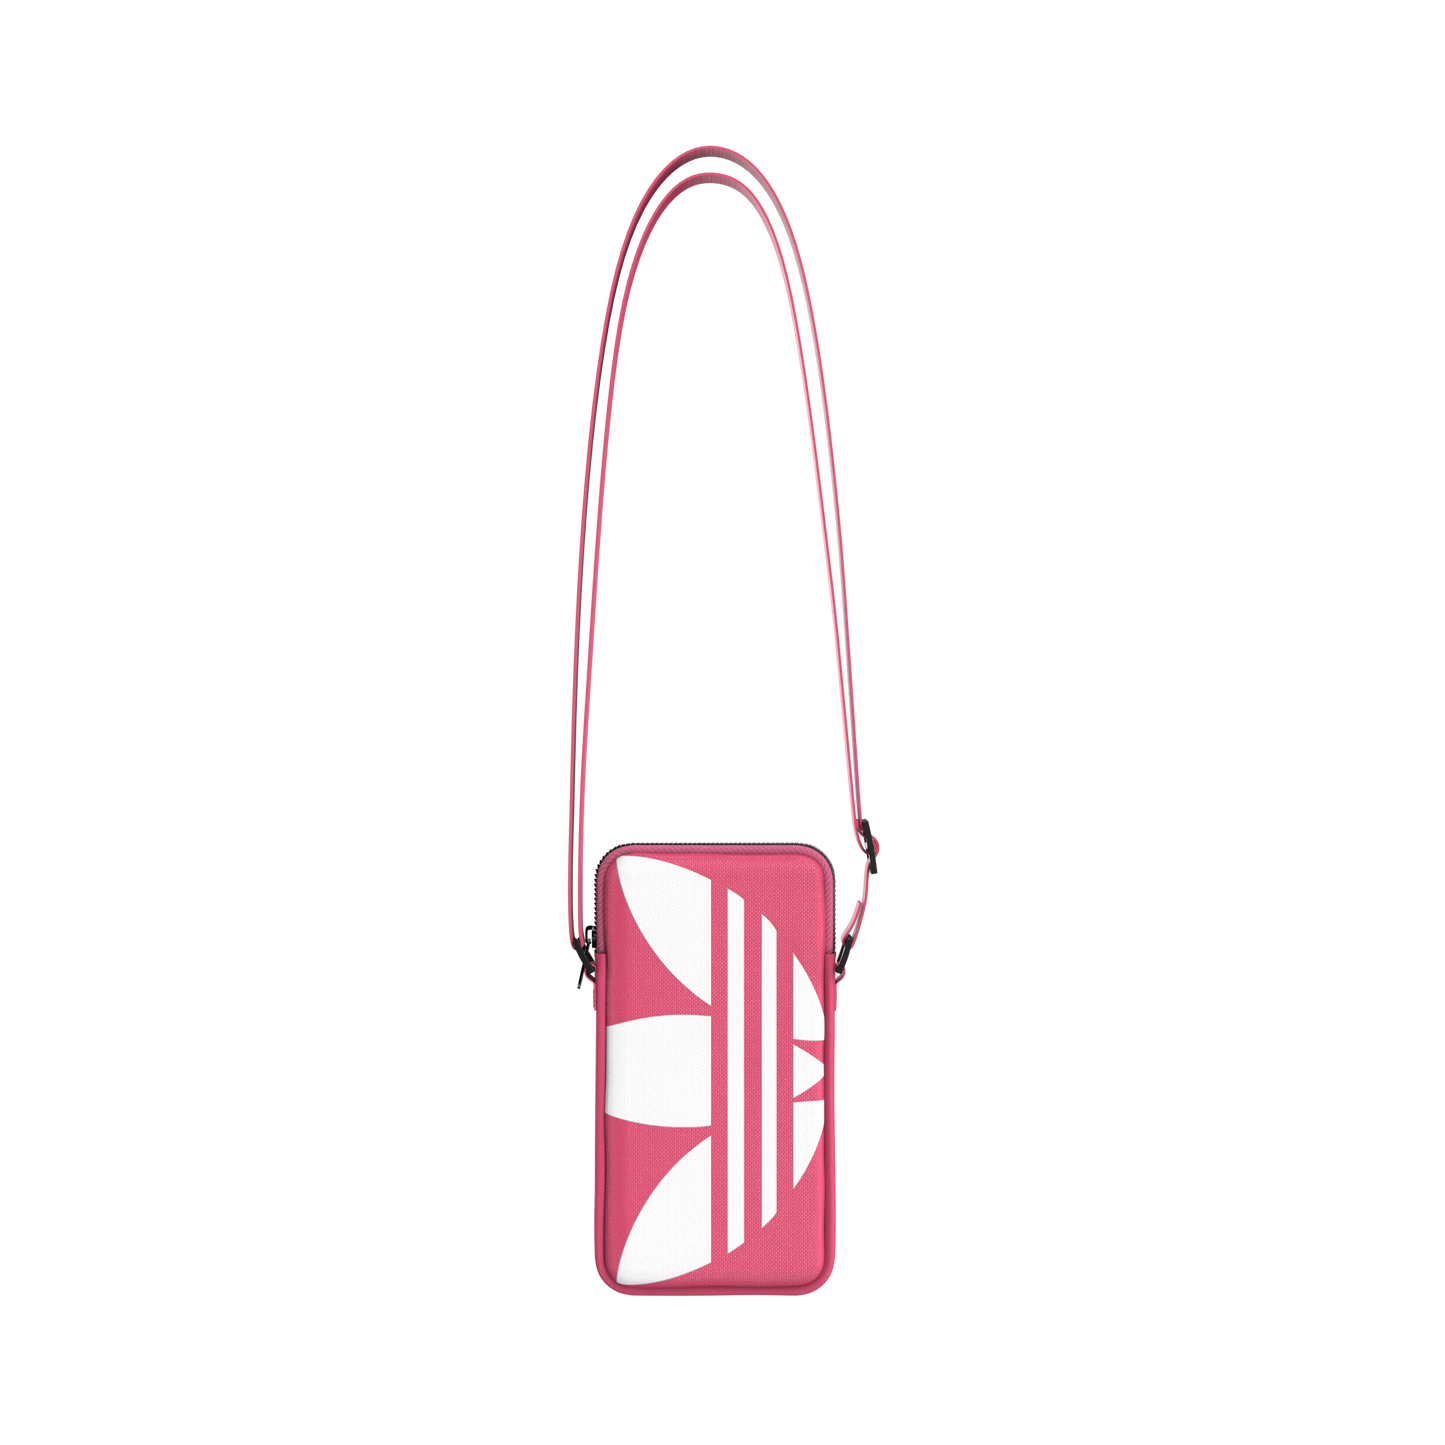 Universal Phone Pouch Pink